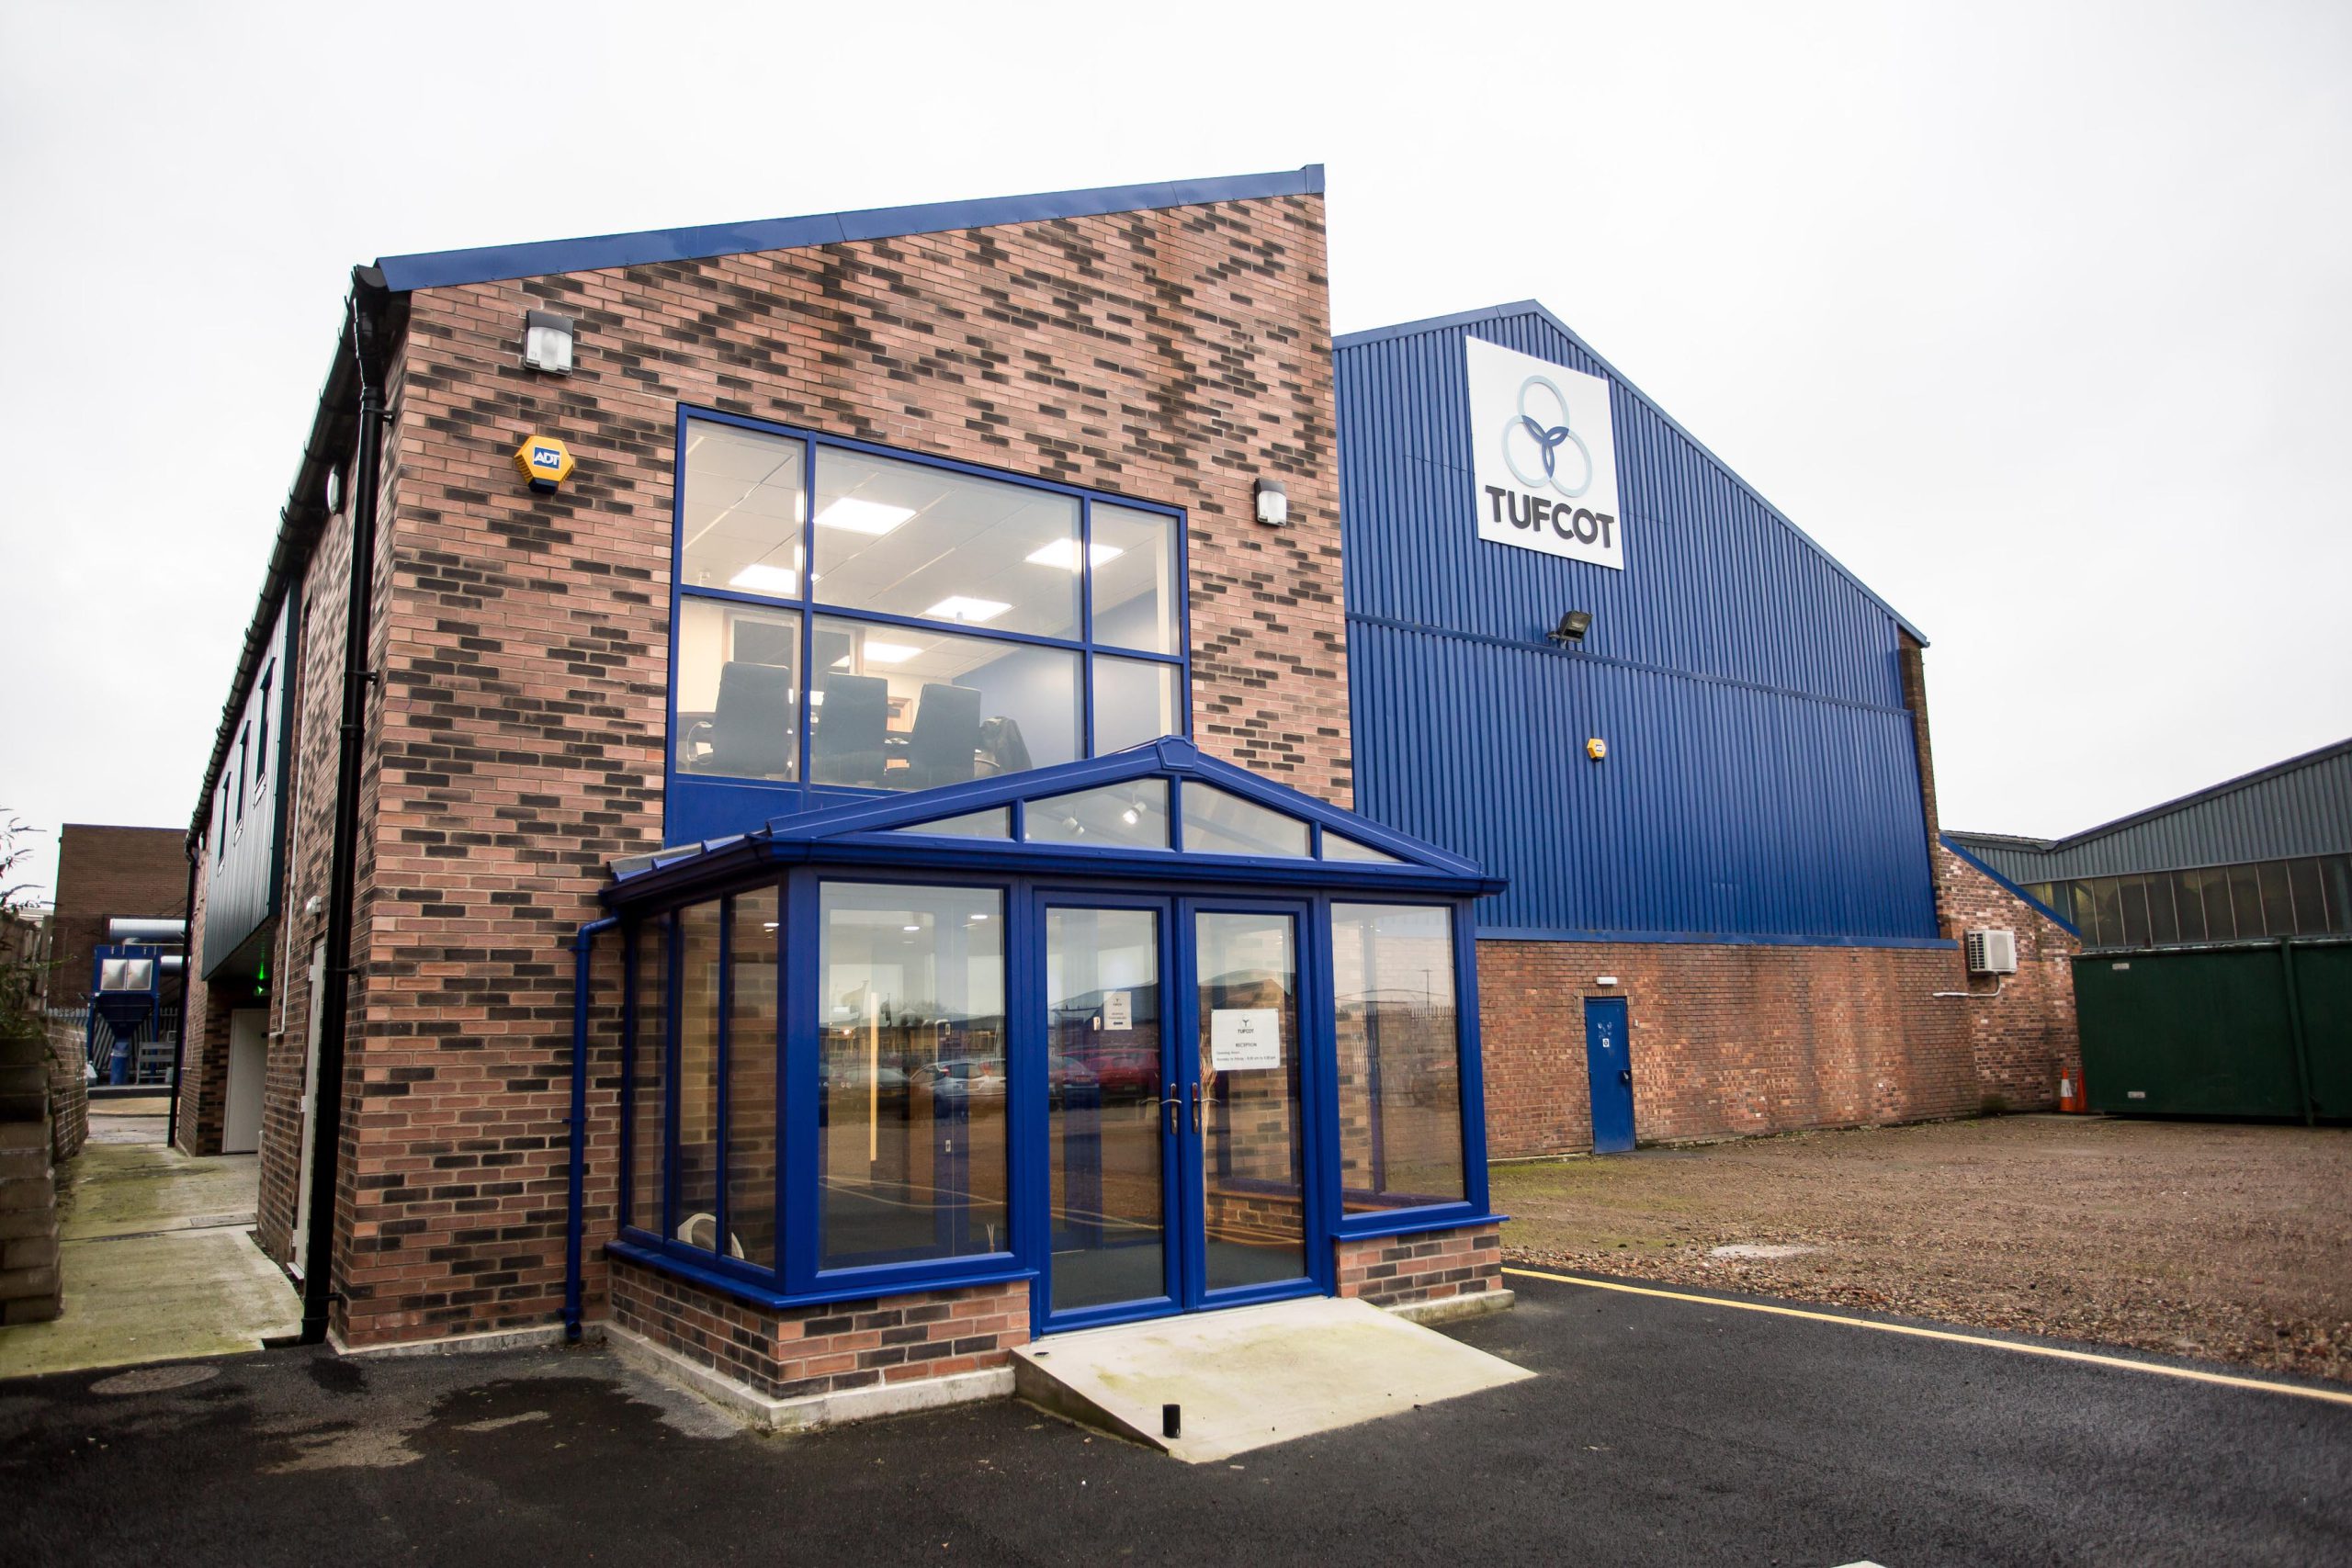 Exterior view of Tufcot’s facility in Sheffield